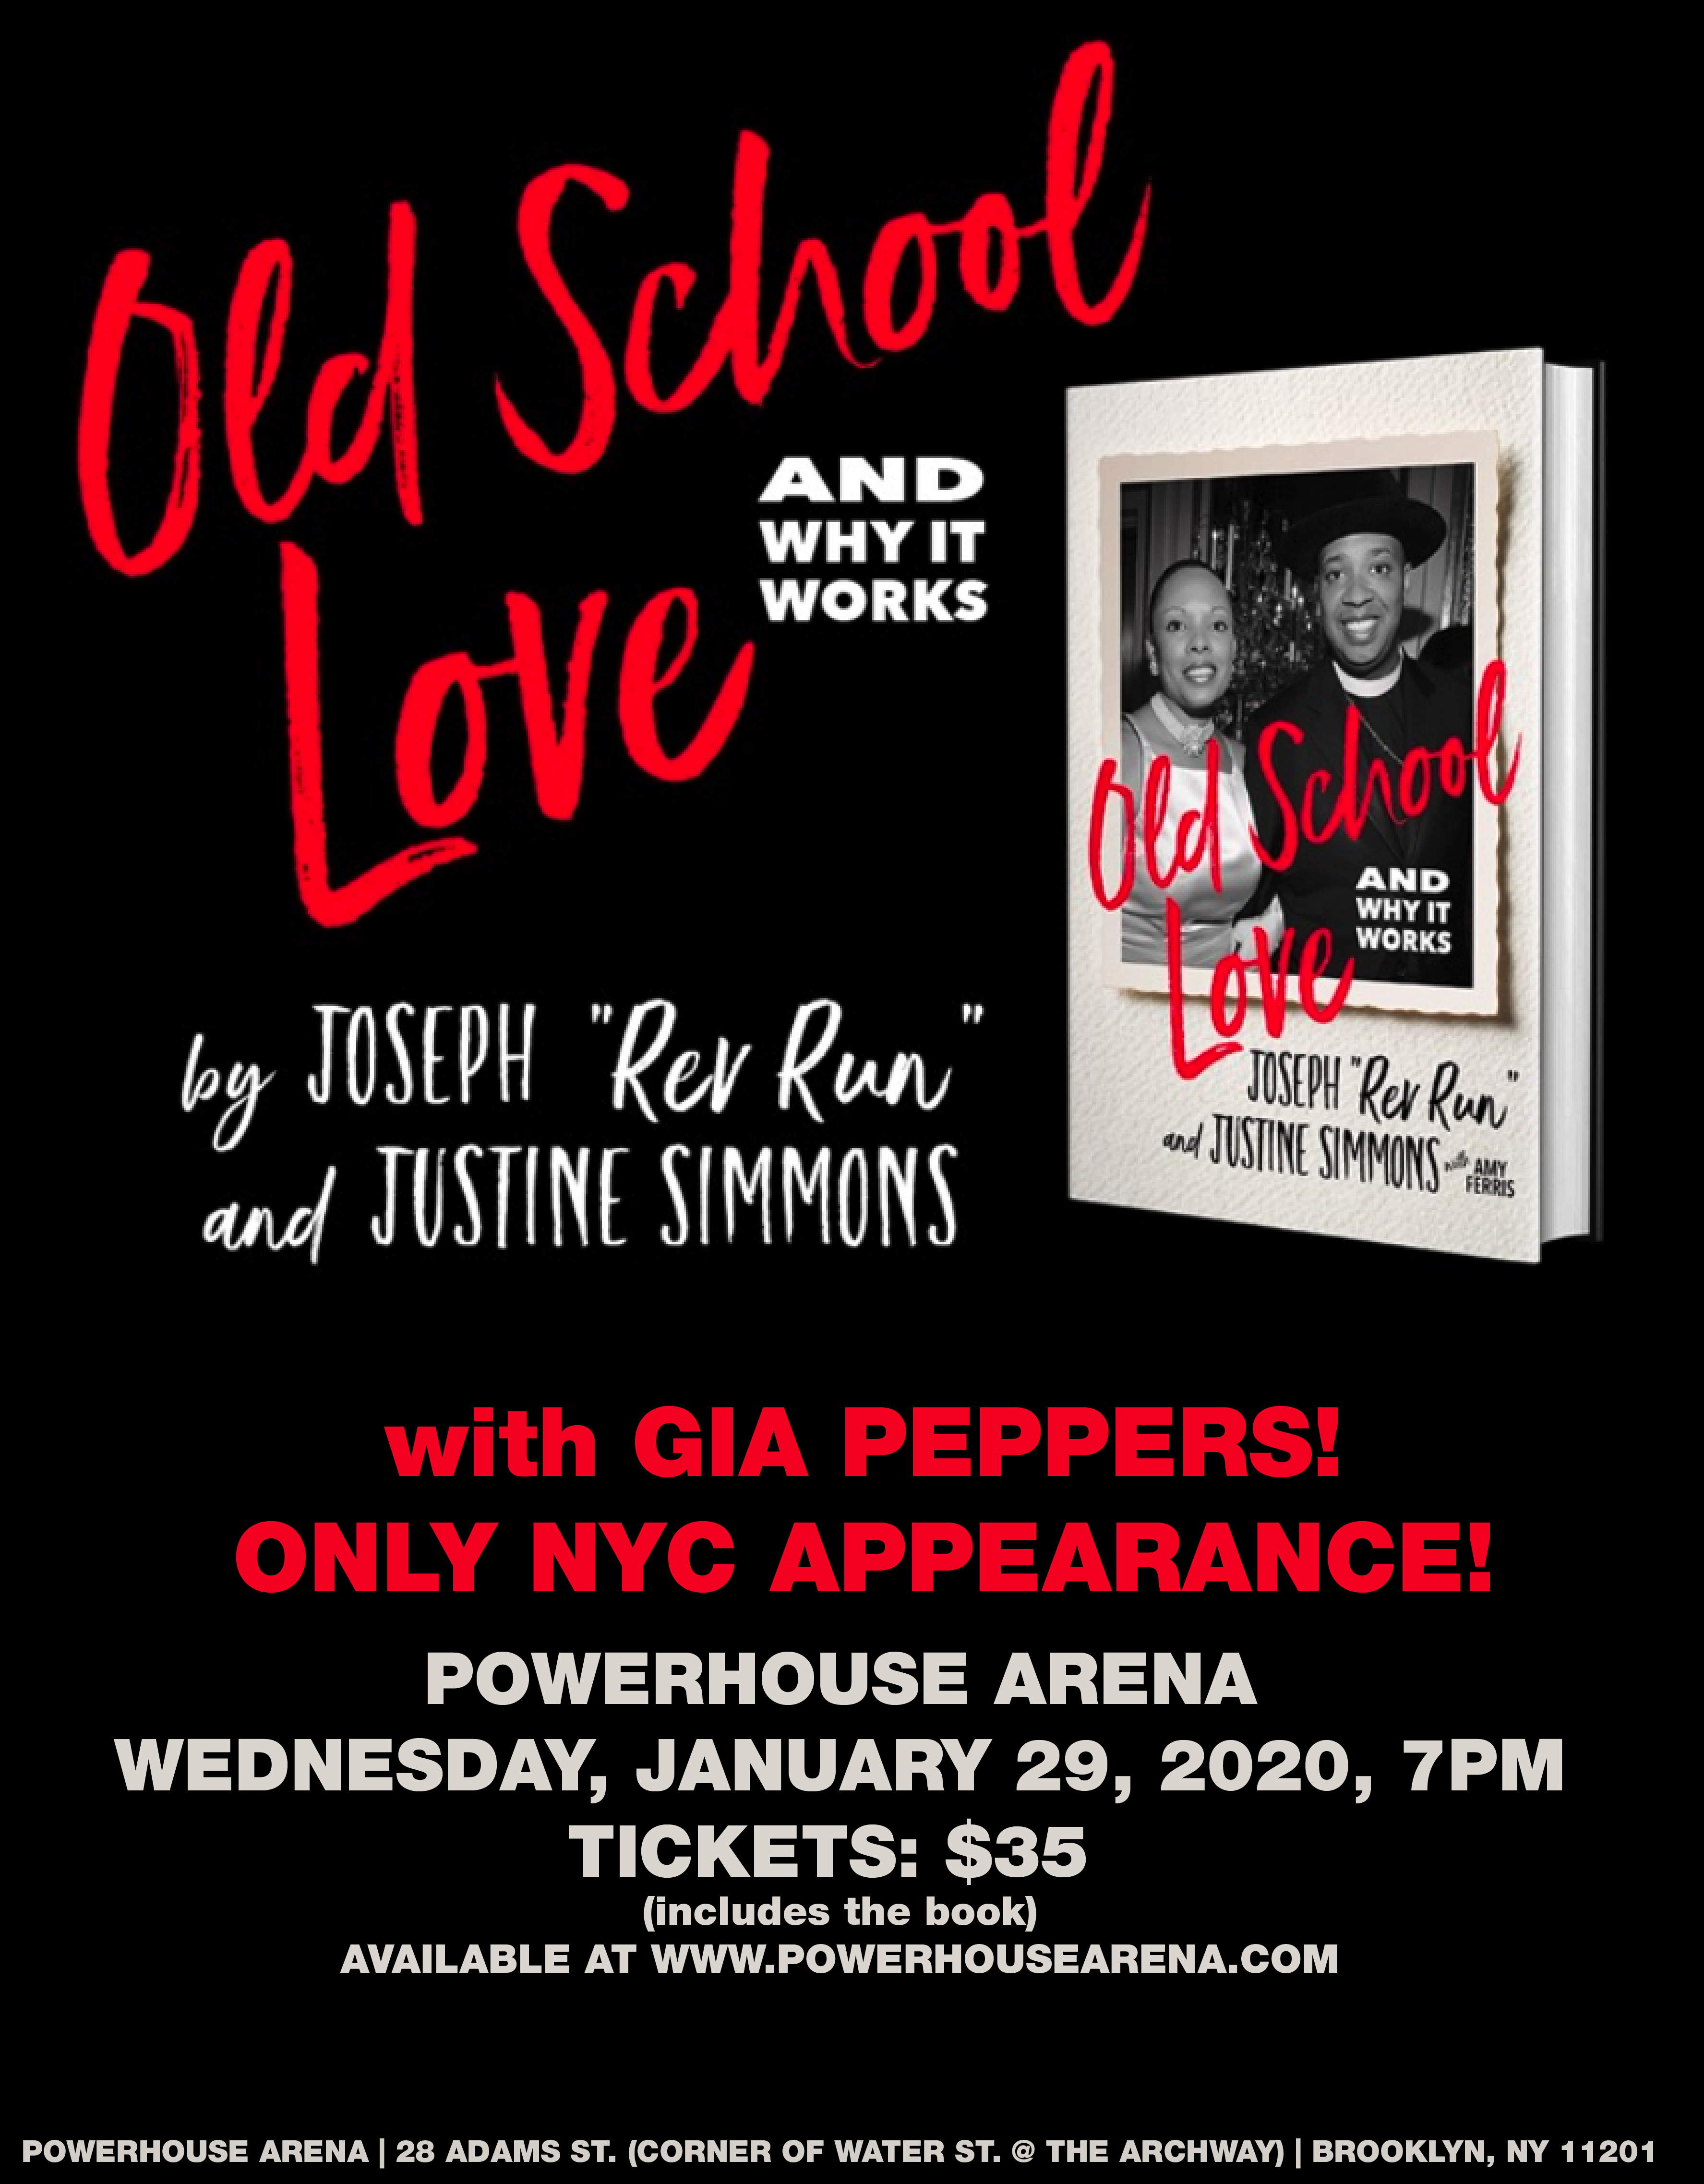 Book Launch: Old School Love by Joseph "Rev Run" Simmons and Justine Simmons in conversation with Gia Peppers